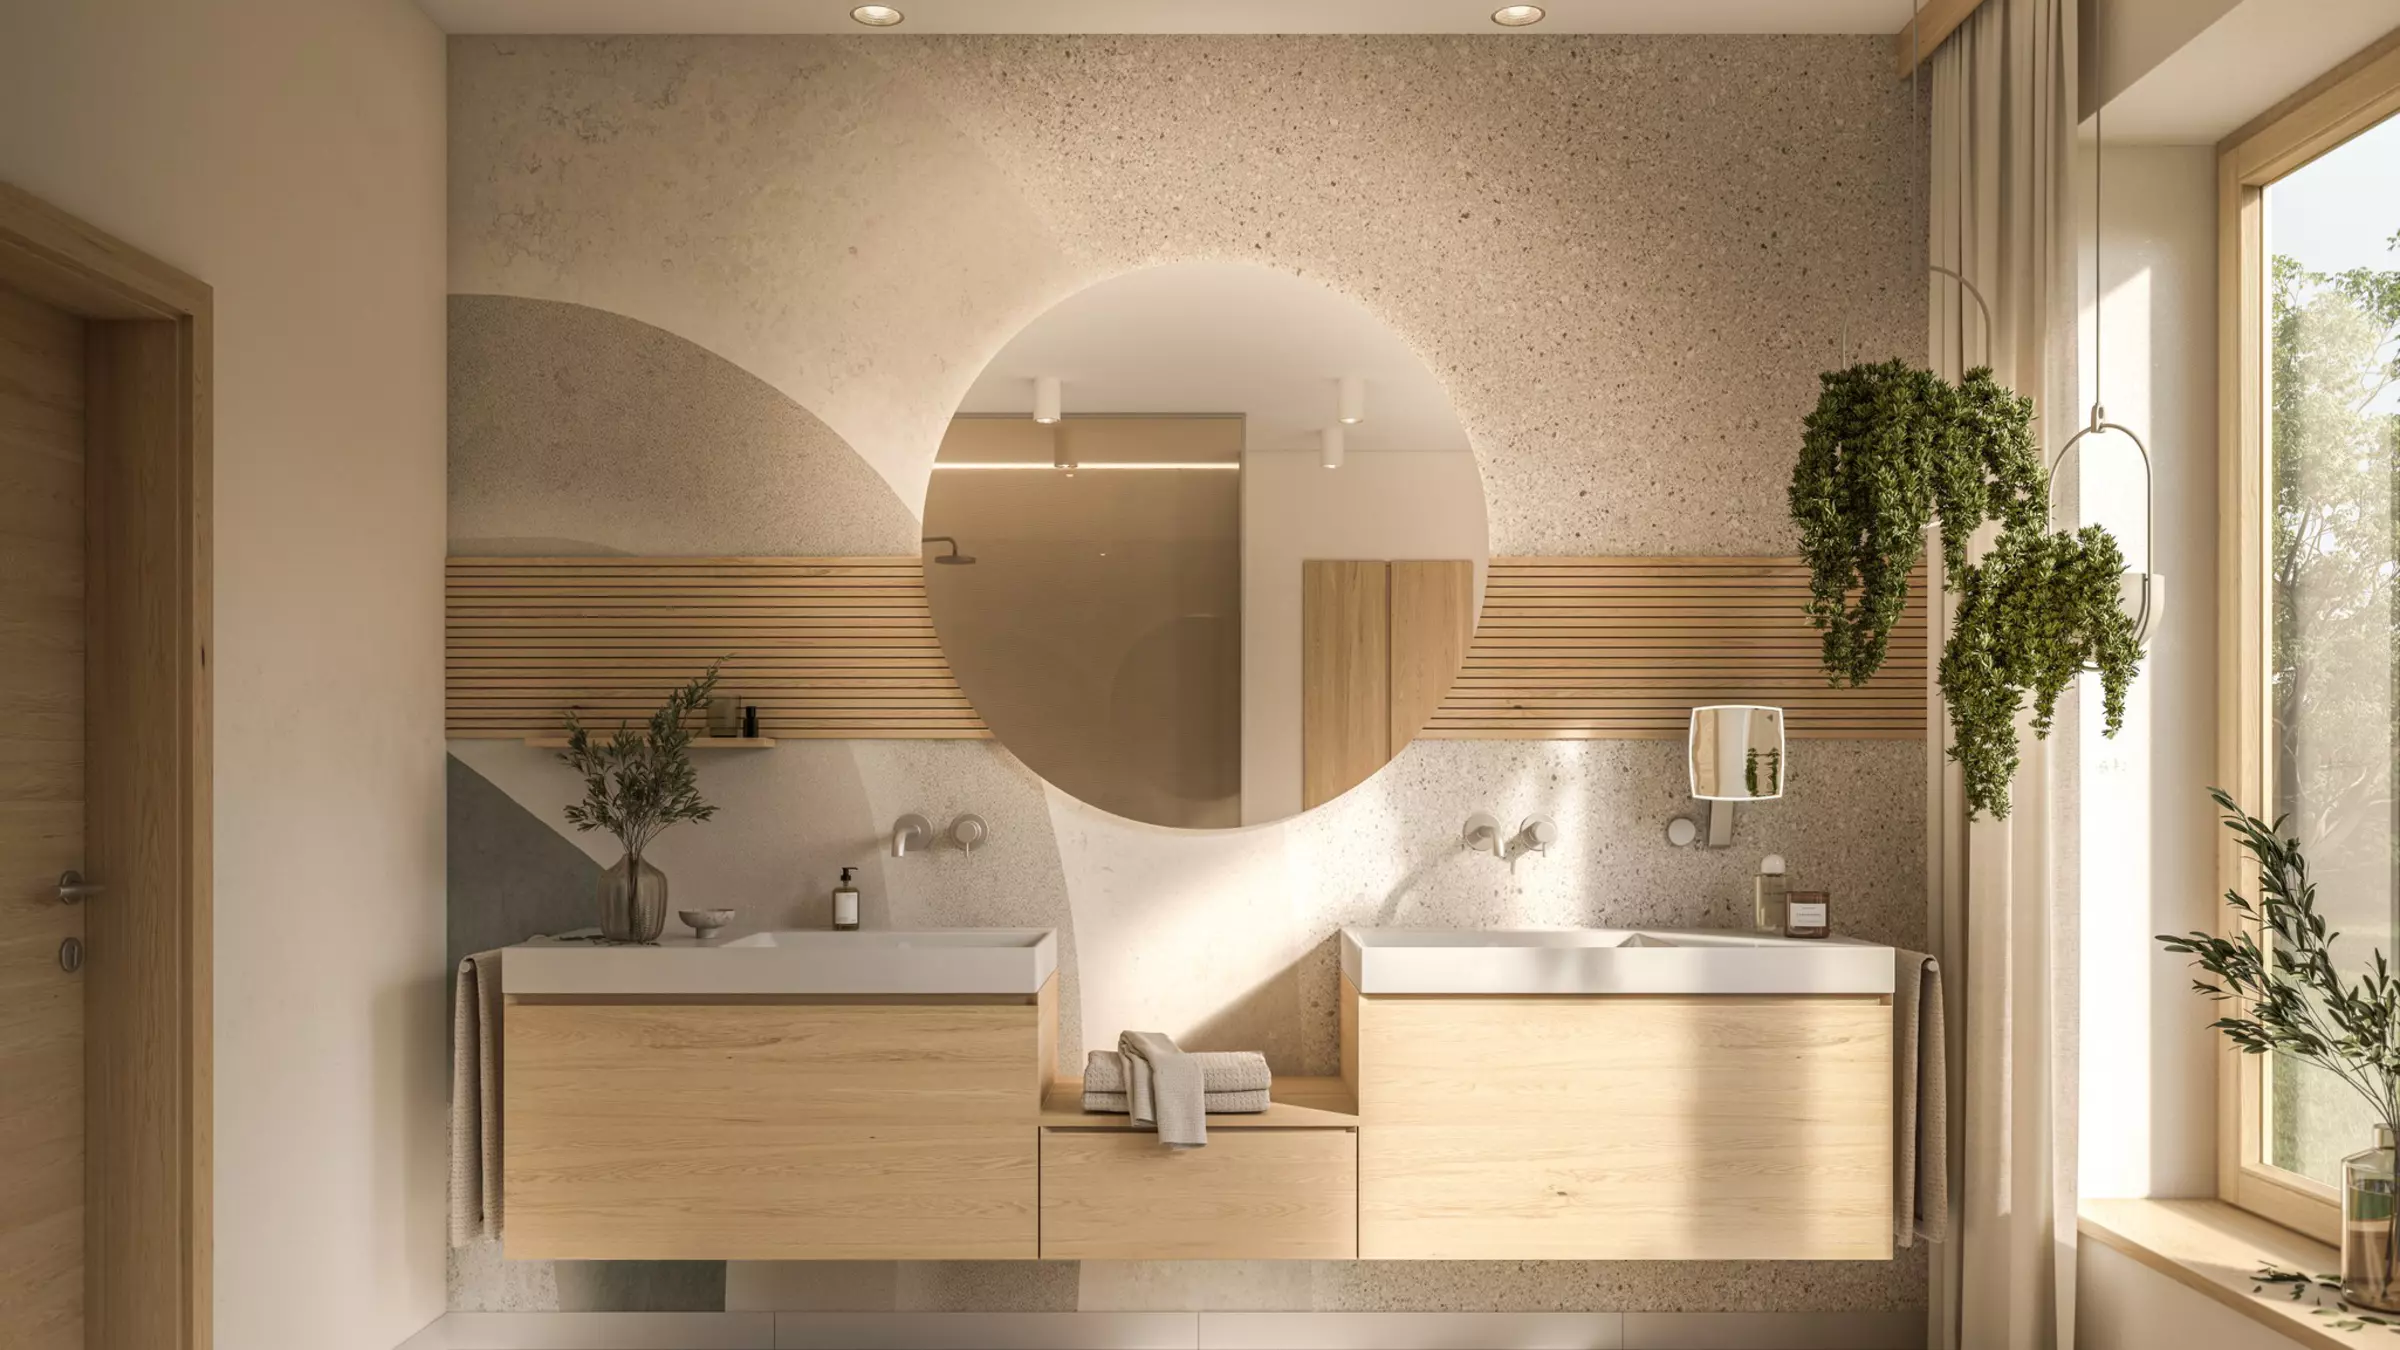 Two washbasins with round mirrors and wooden vanity units in a light-flooded bathroom.